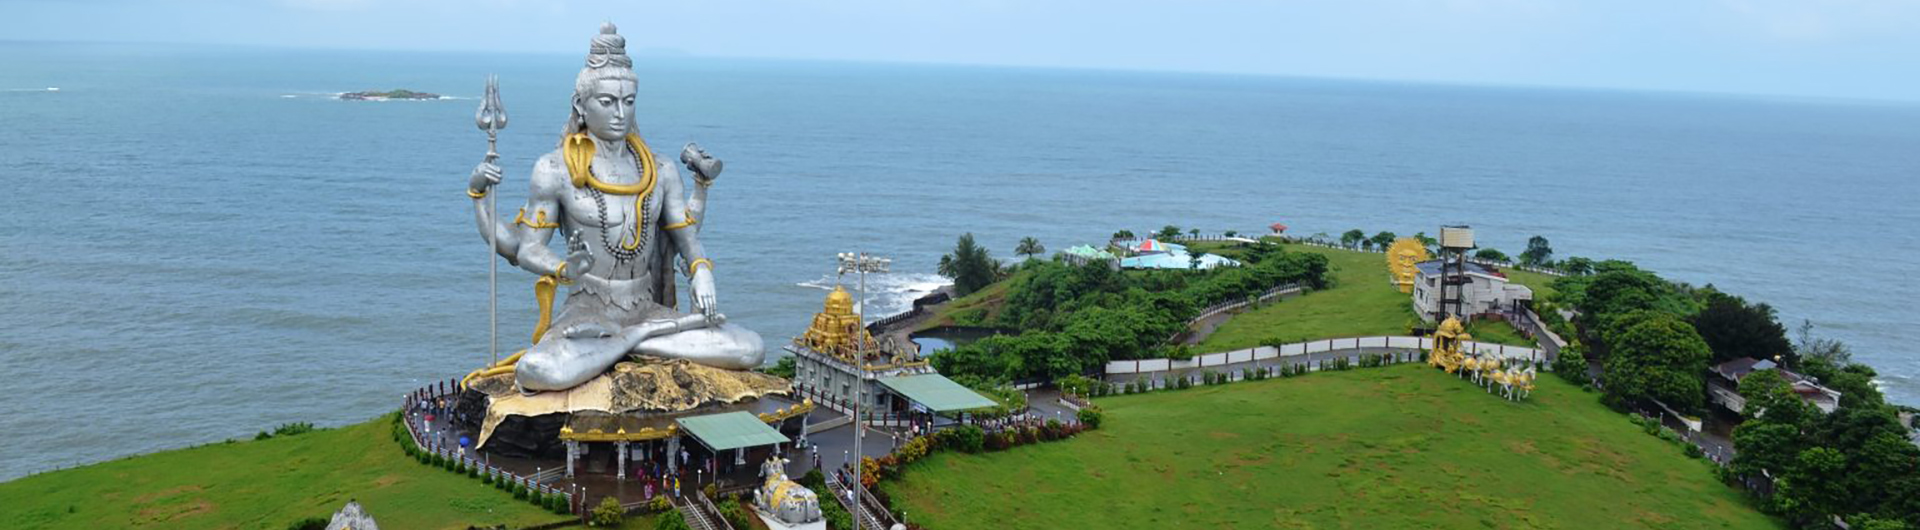 Statue of Lord Shiva. Located in Murdeshwar, Karnataka, India. A famous pilgrimage spot in Karnataka. This place is surrounded by the Arabian sea on three sides.